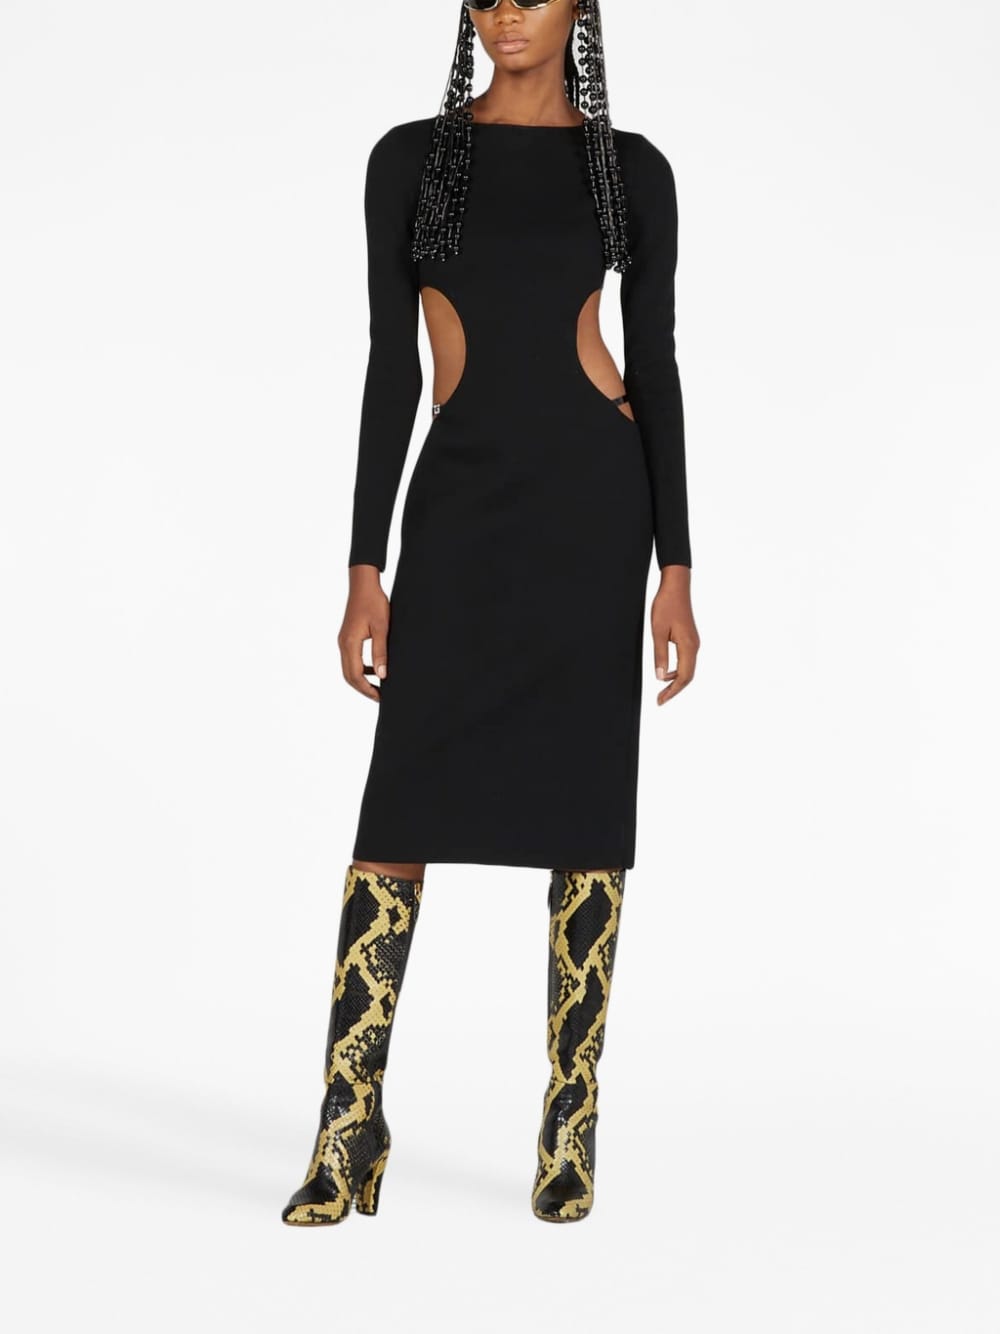 Shop Gucci Black Cut-out Midi Dress For Women's Ss23 Collection